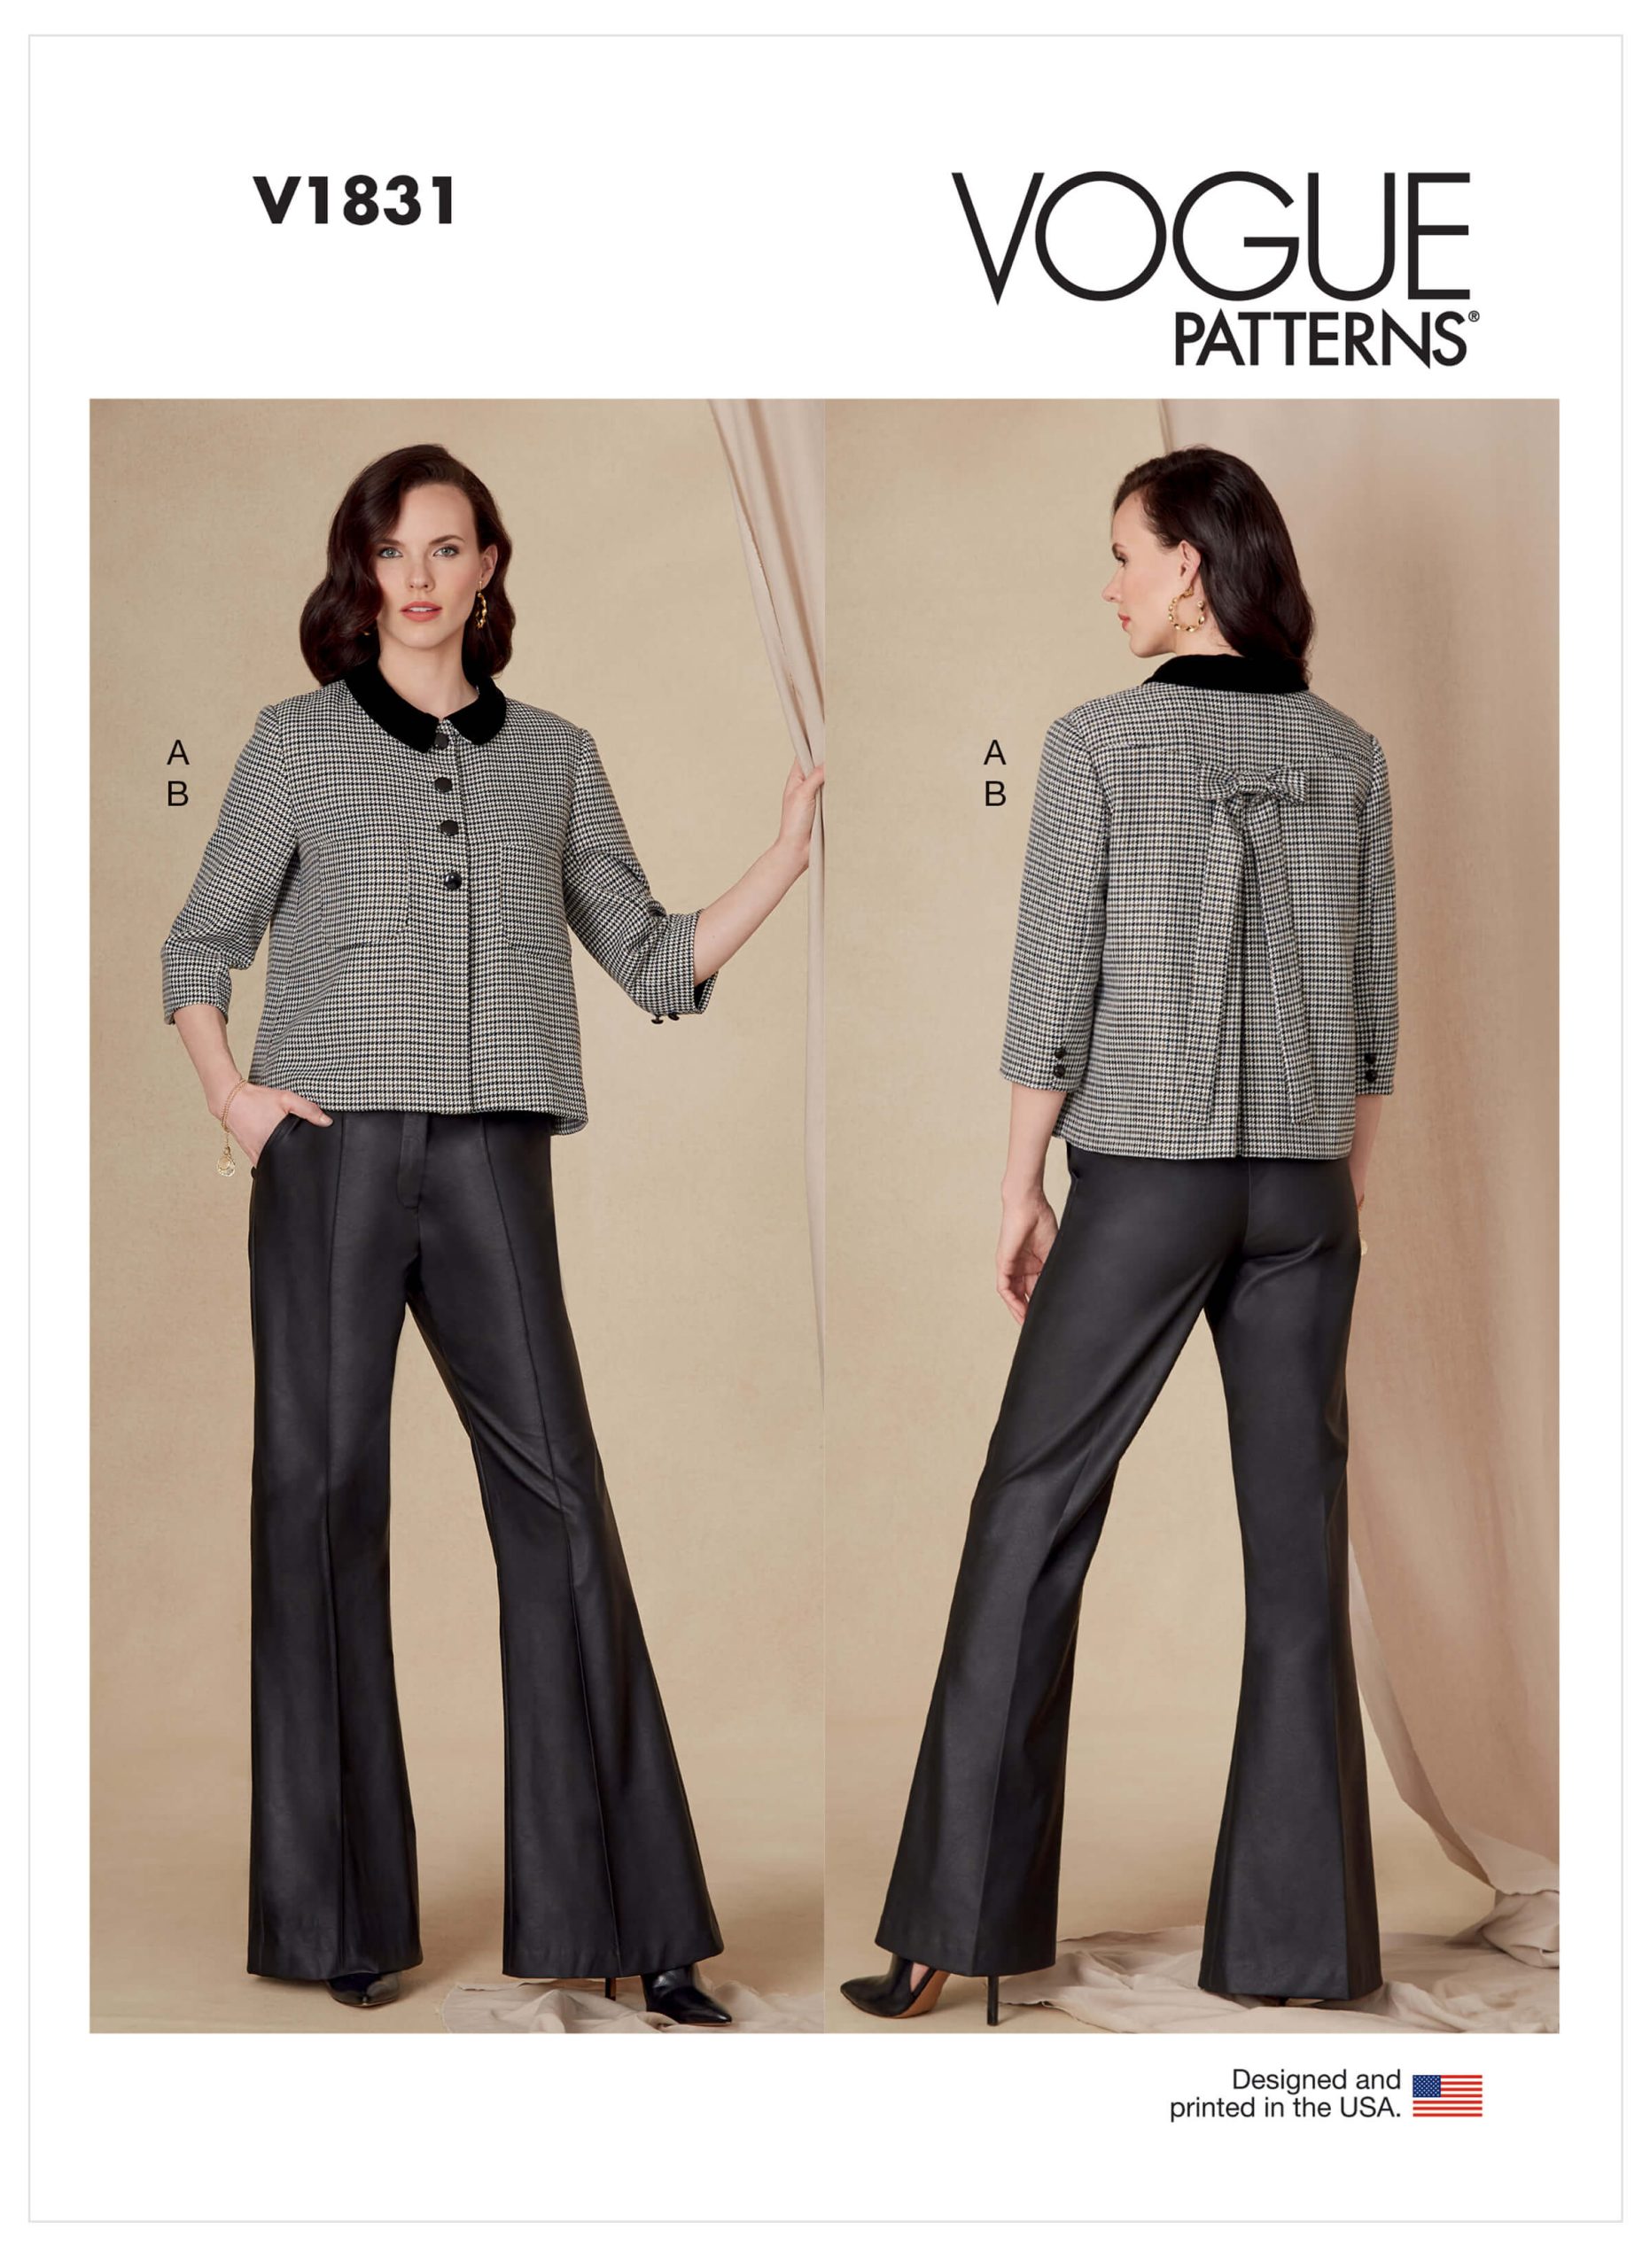 Vogue Patterns V1831 Misses' and Misses' Petite Jacket and Trousers